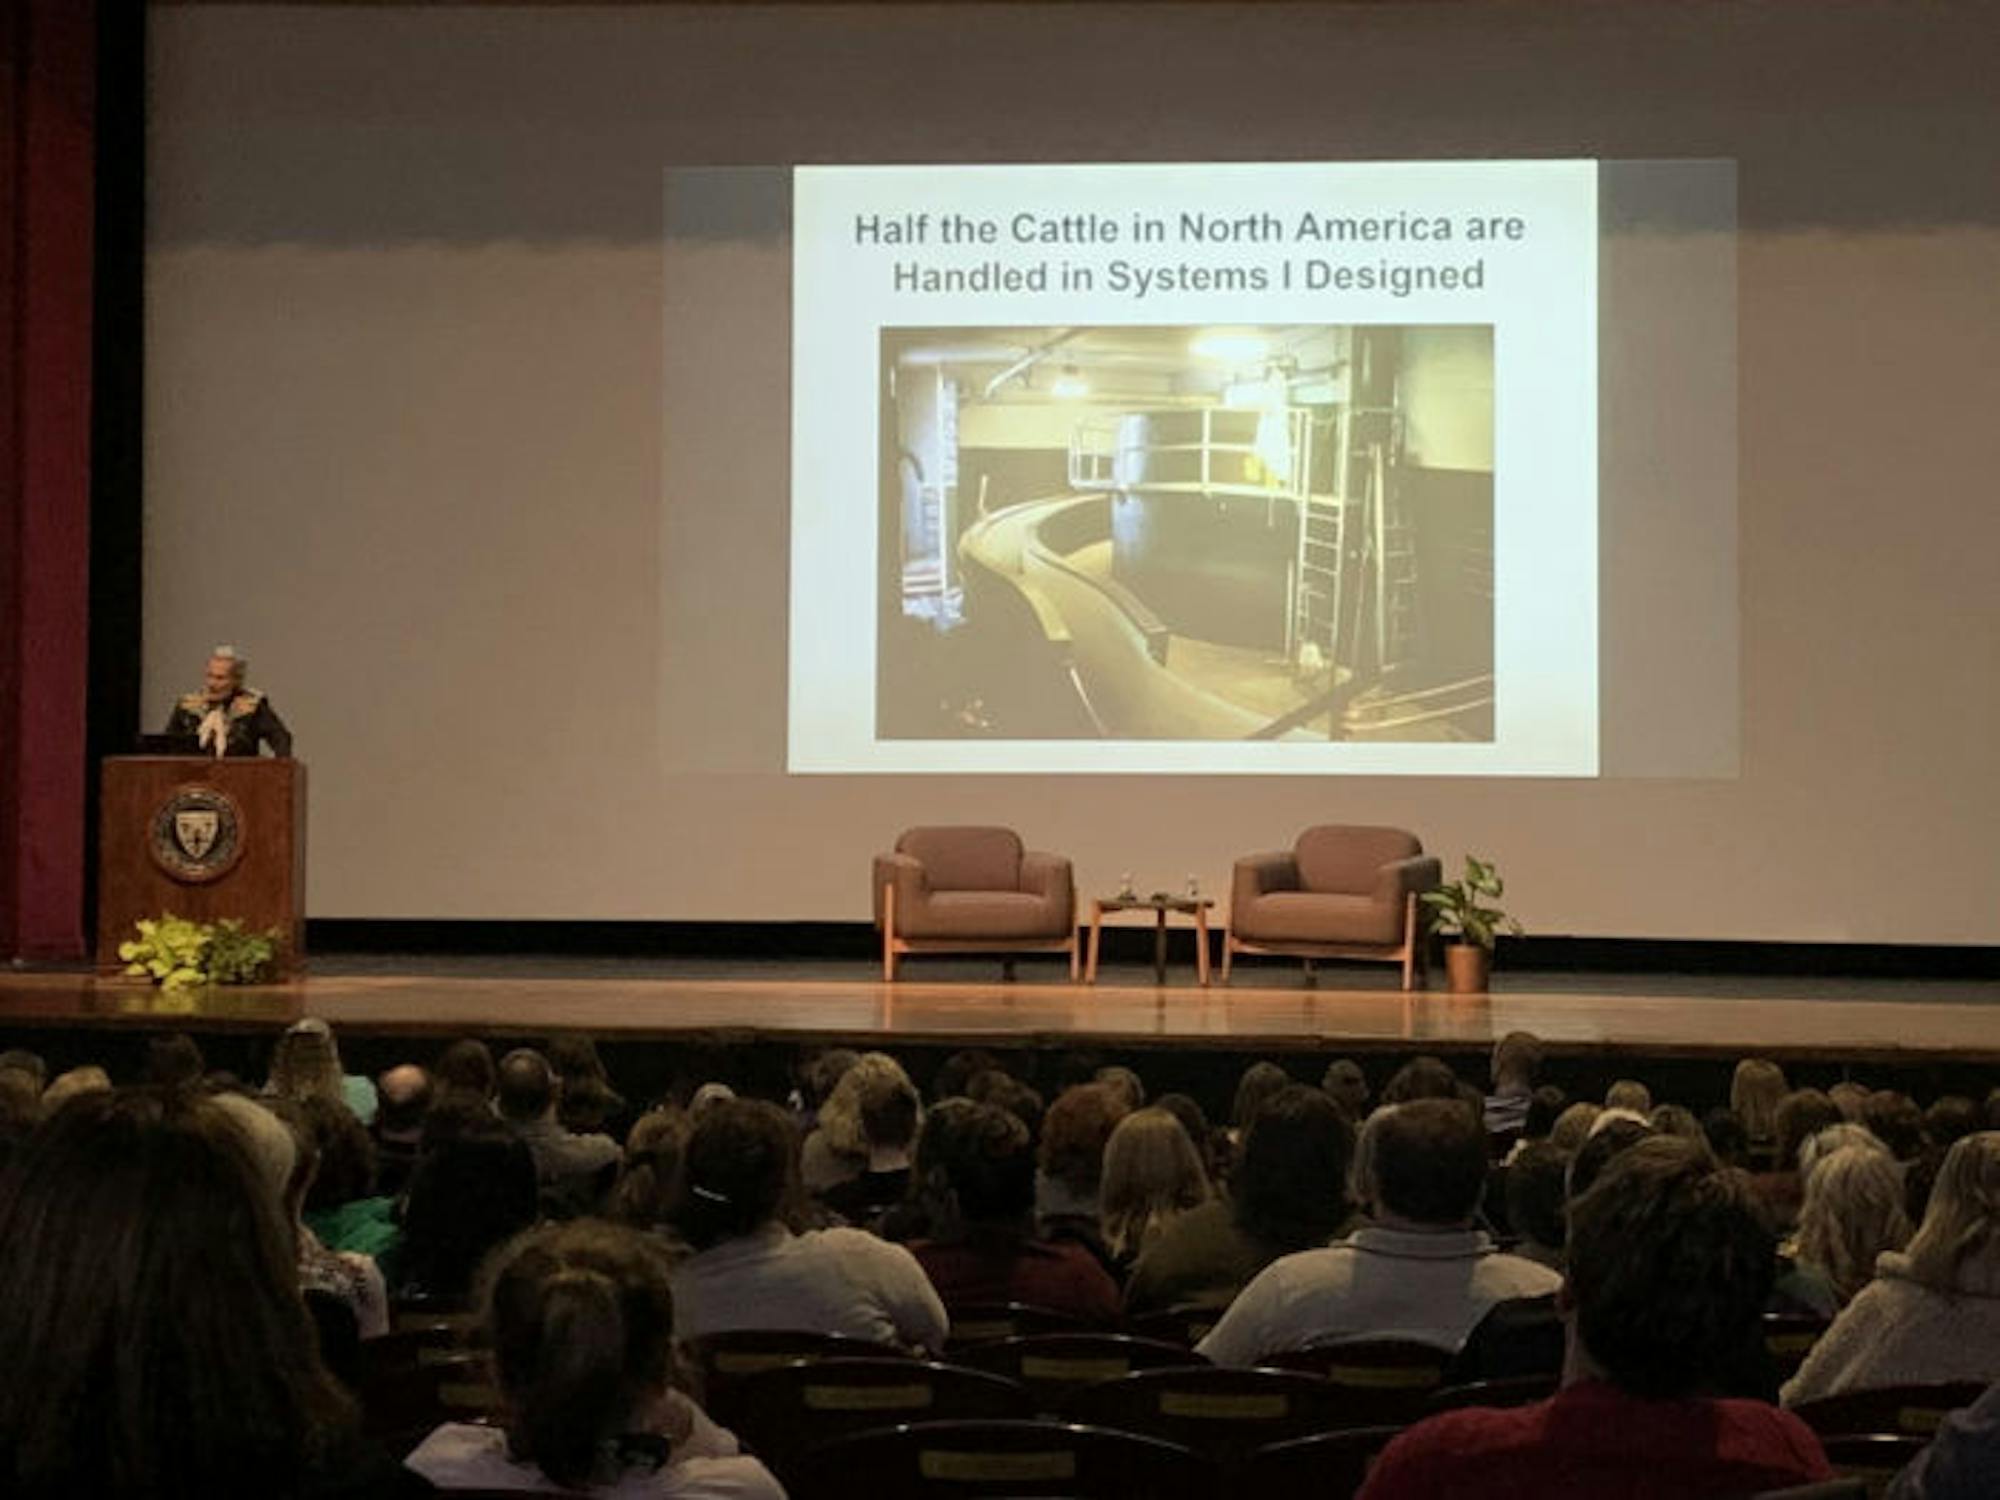 Temple Grandin speaking at Saint Mary's College